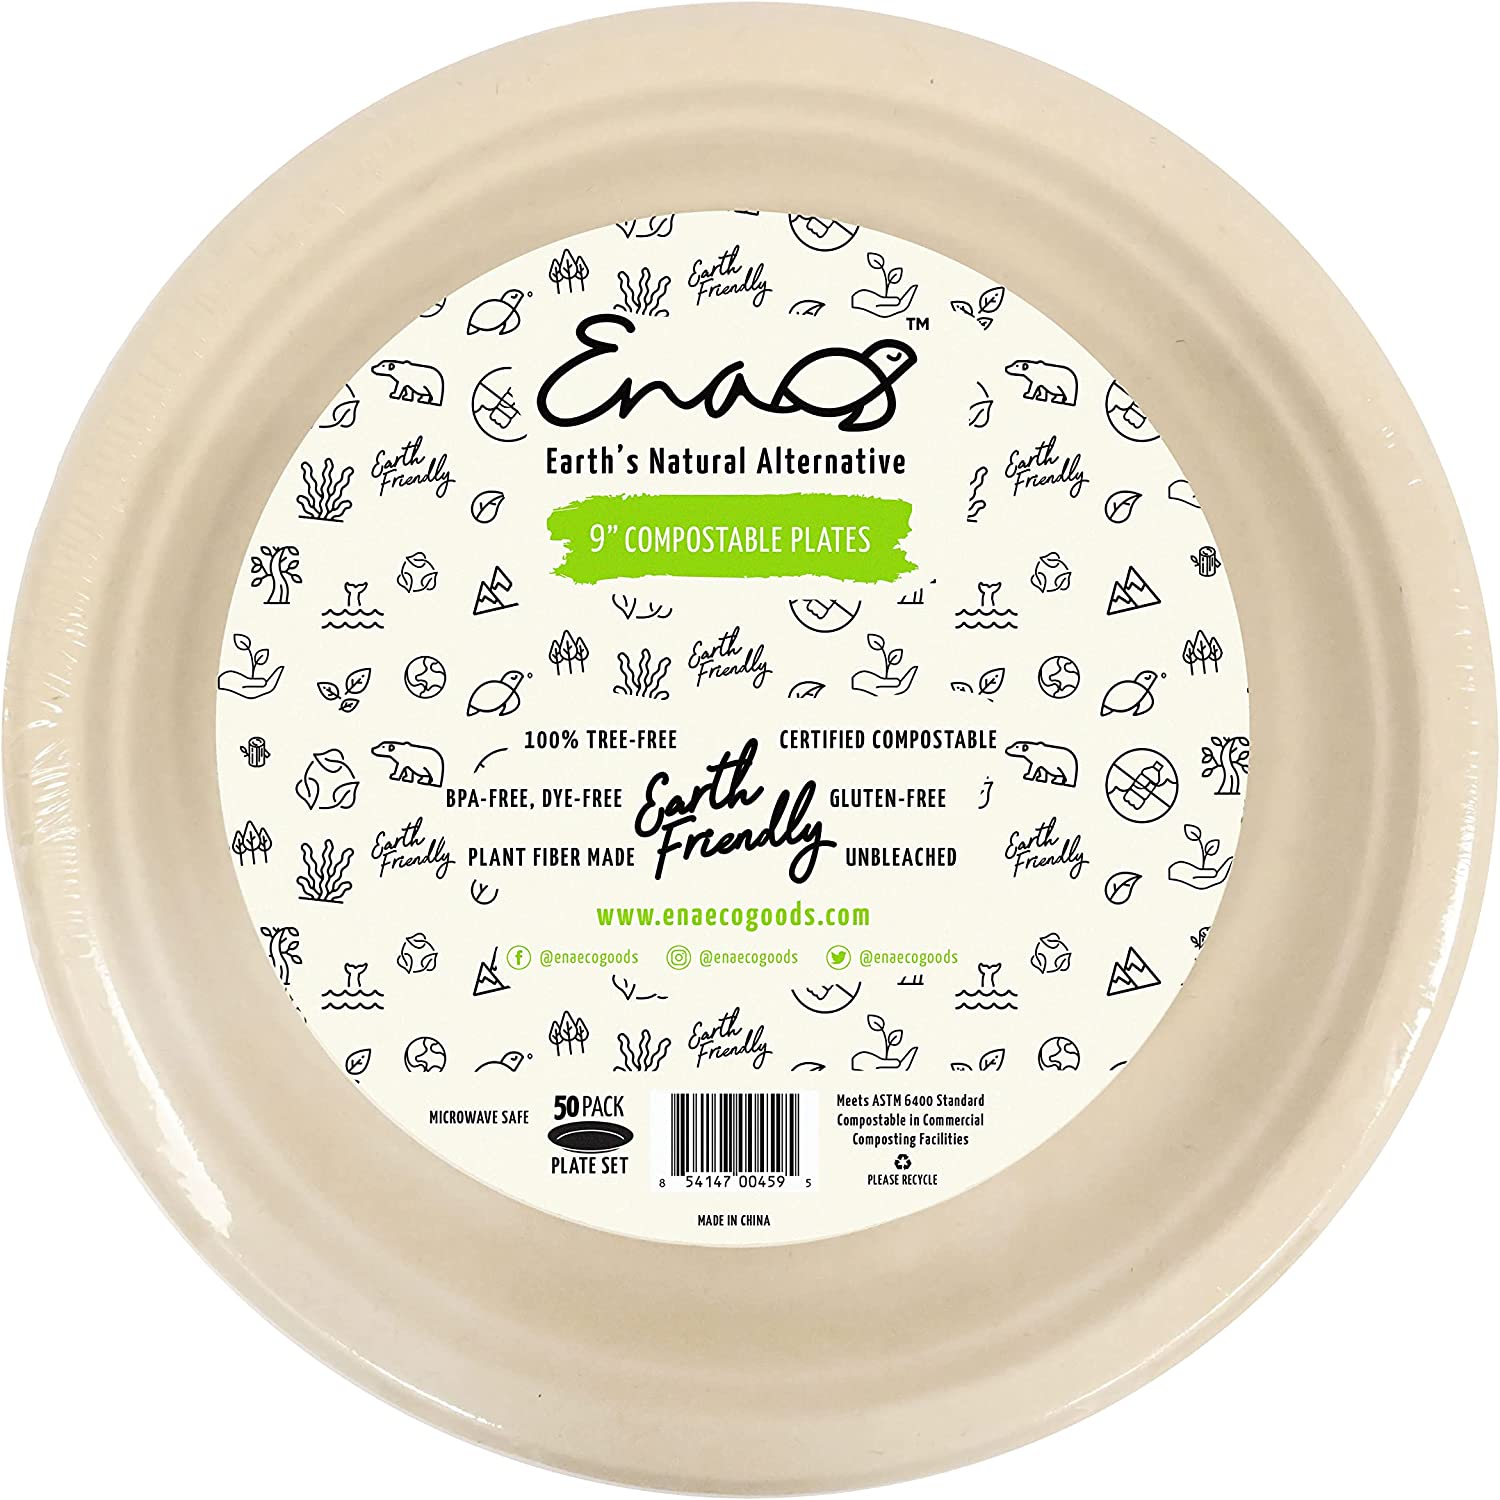 CantaGreen 6 inch Compostable Plates 100 Count Heavyduty